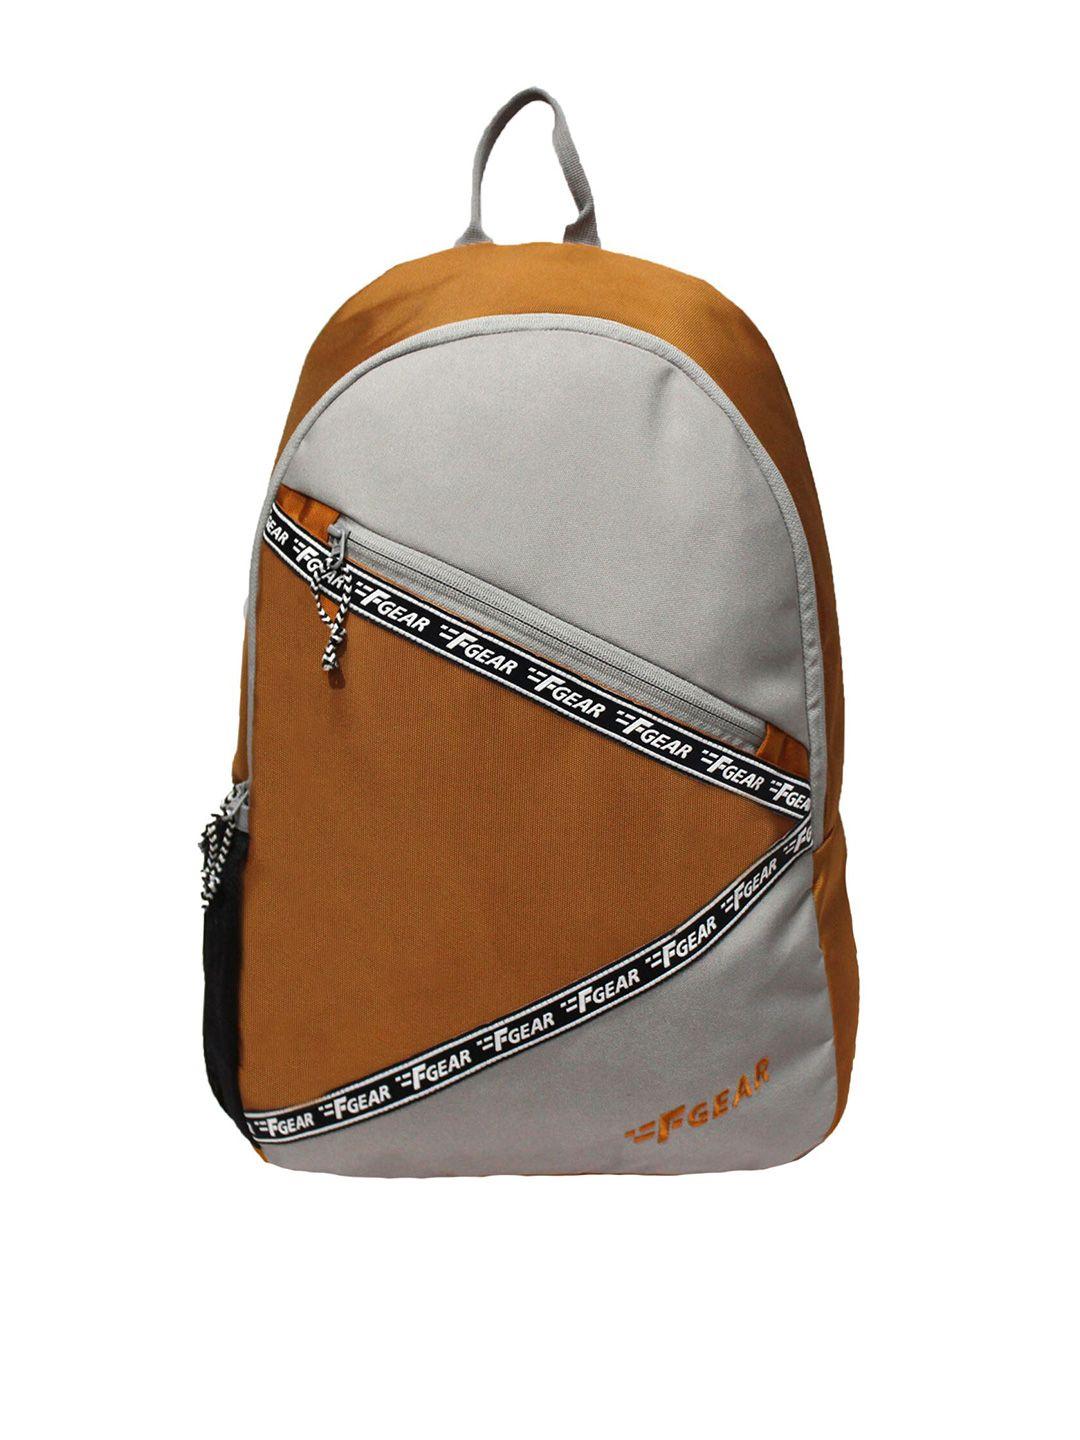 f gear unisex gold-toned & grey colourblocked backpack